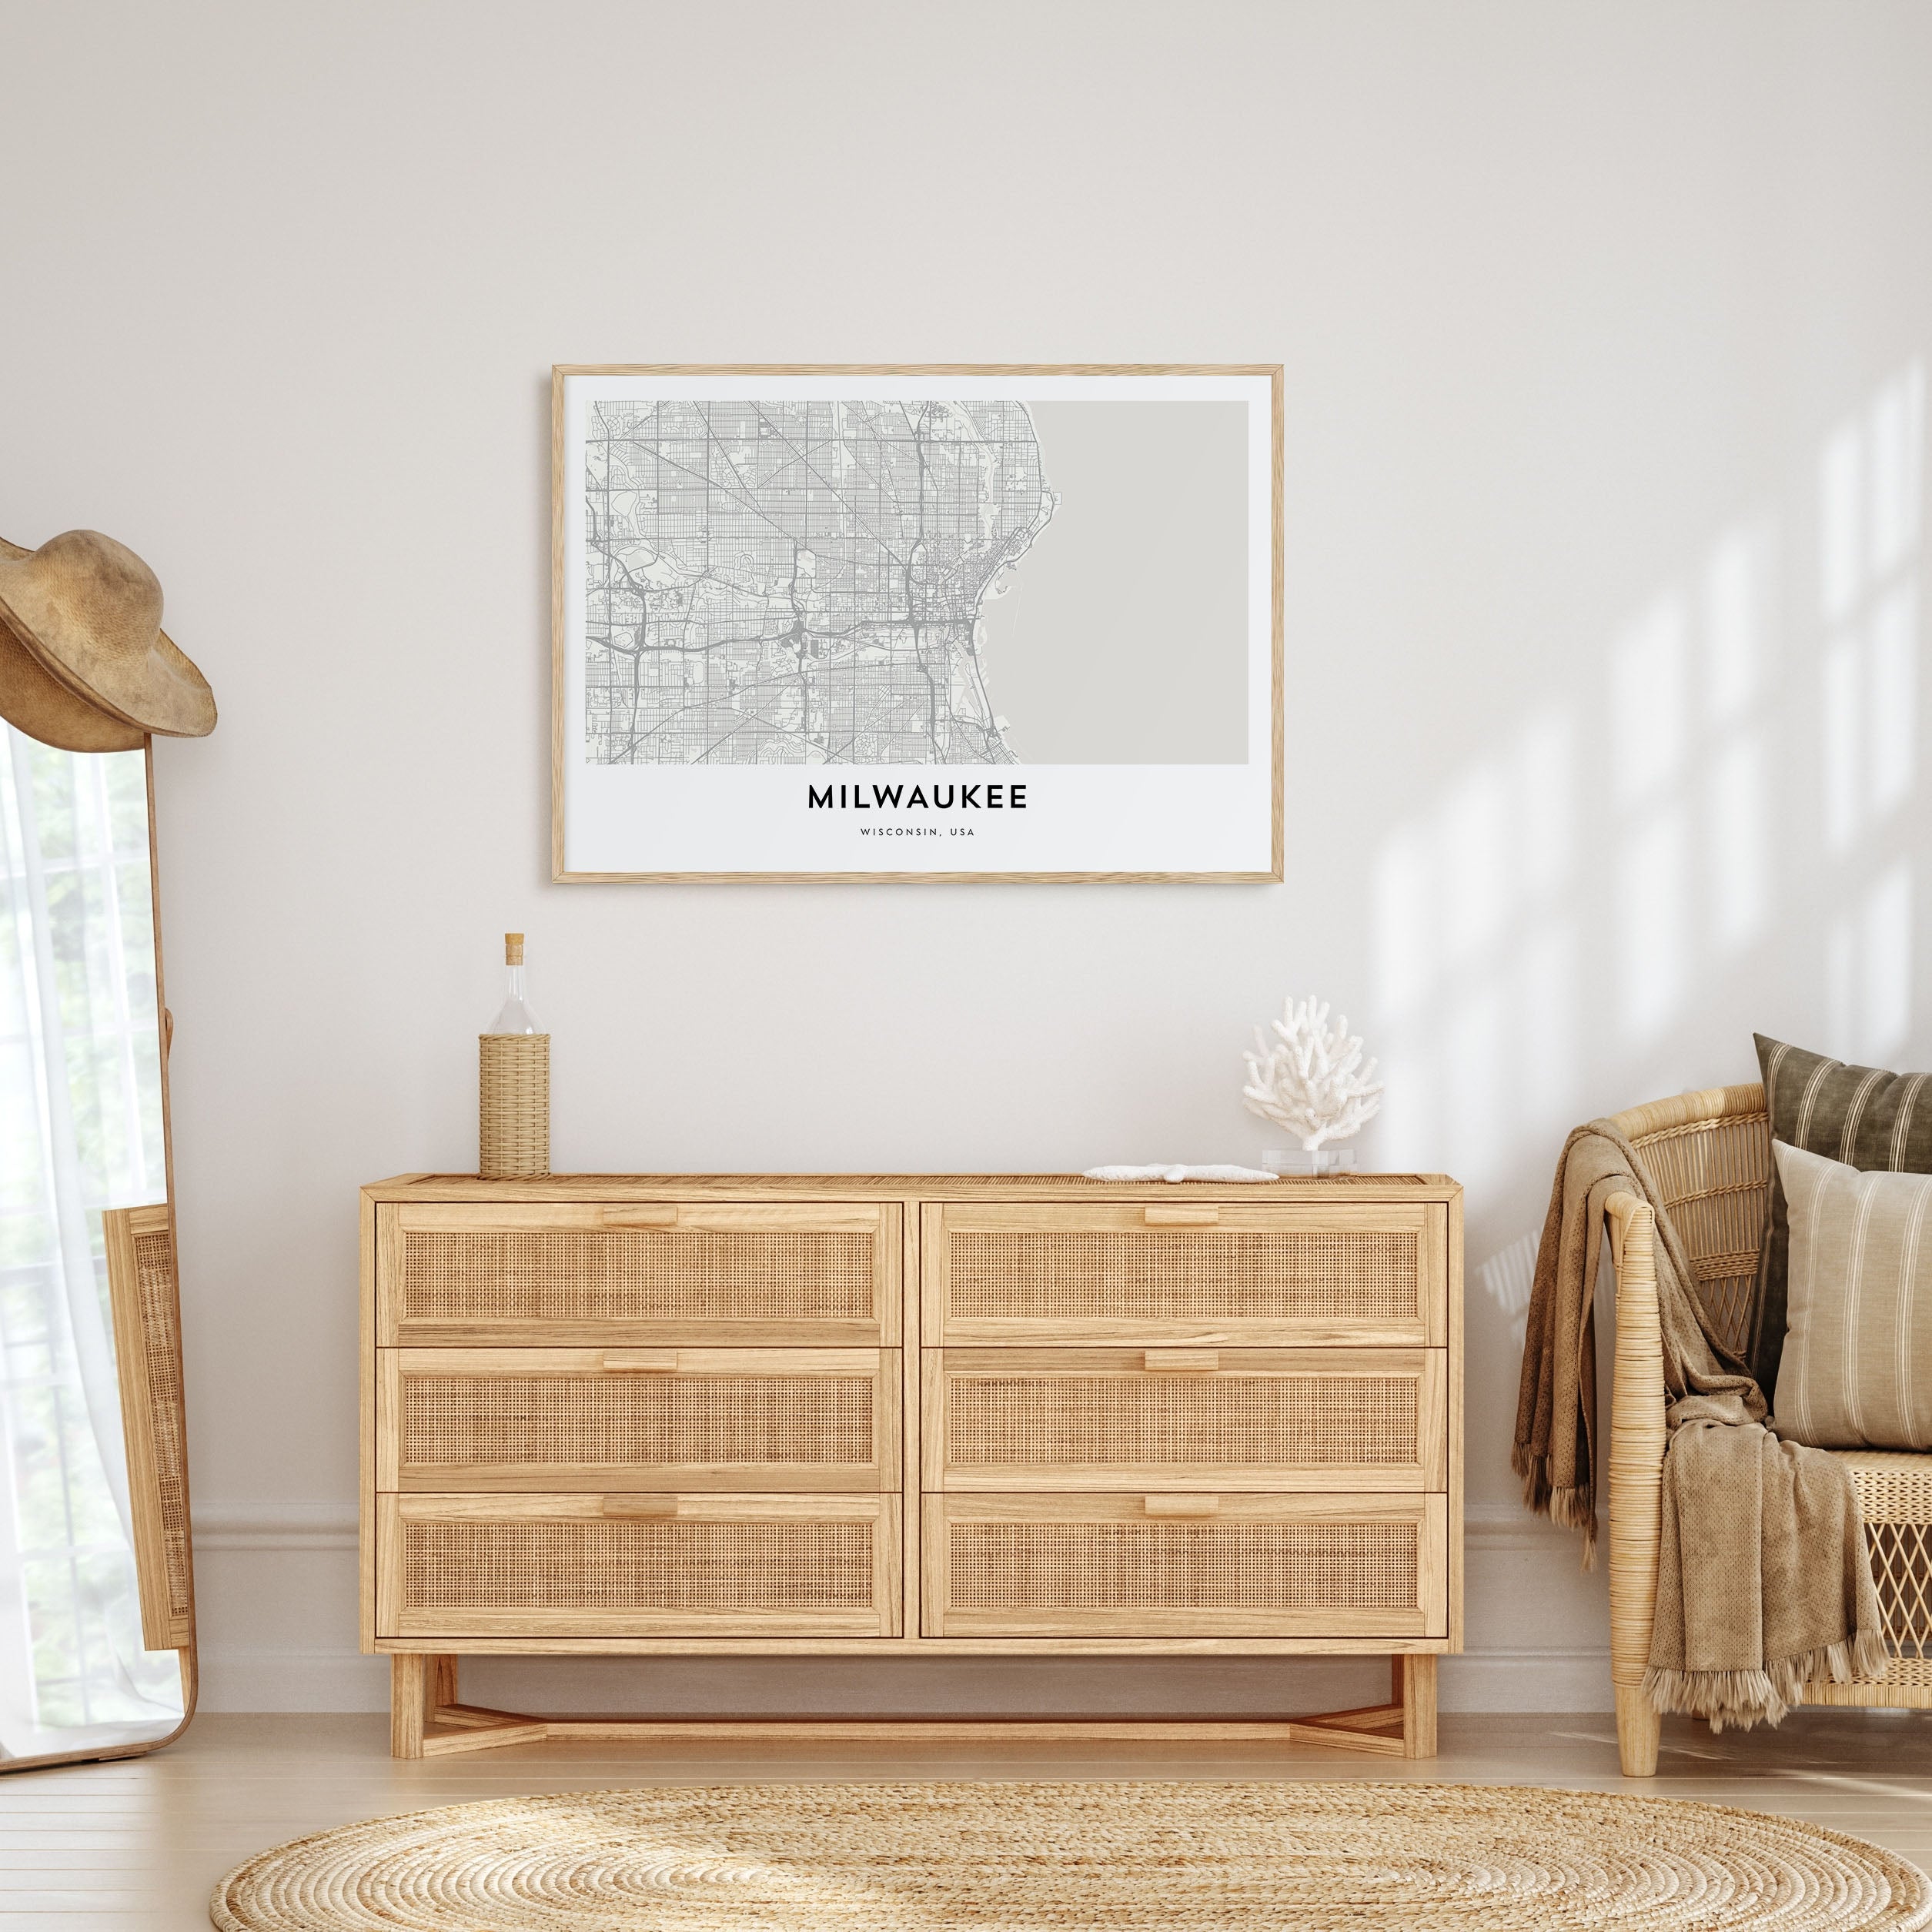 Milwaukee Map Landscape Poster